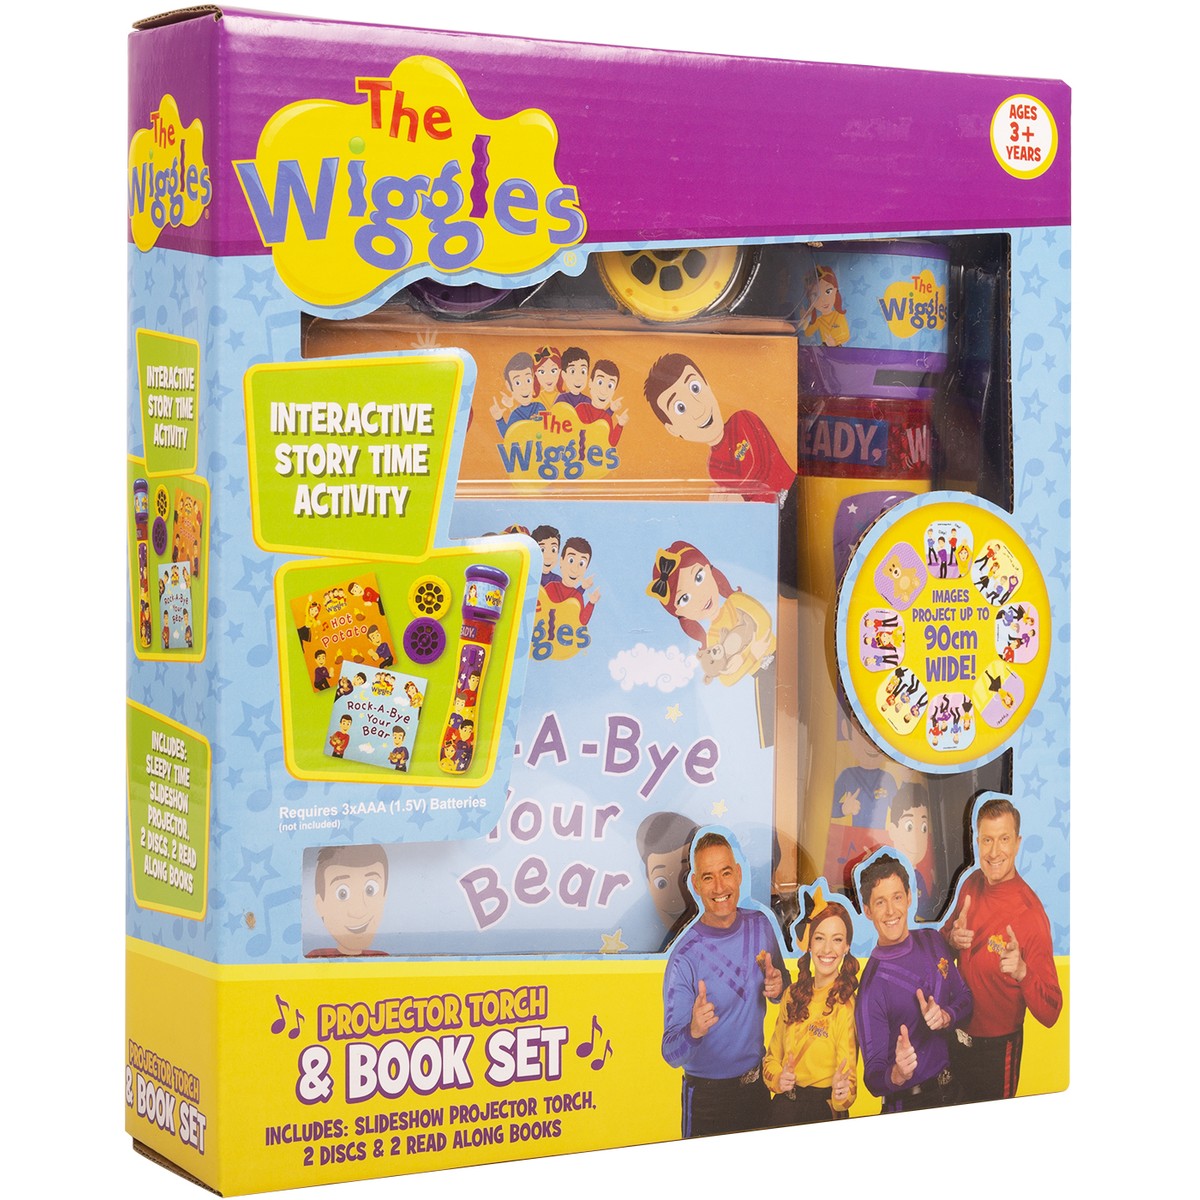 THE WIGGLES PROJECTOR TORCH AND BOOK SET